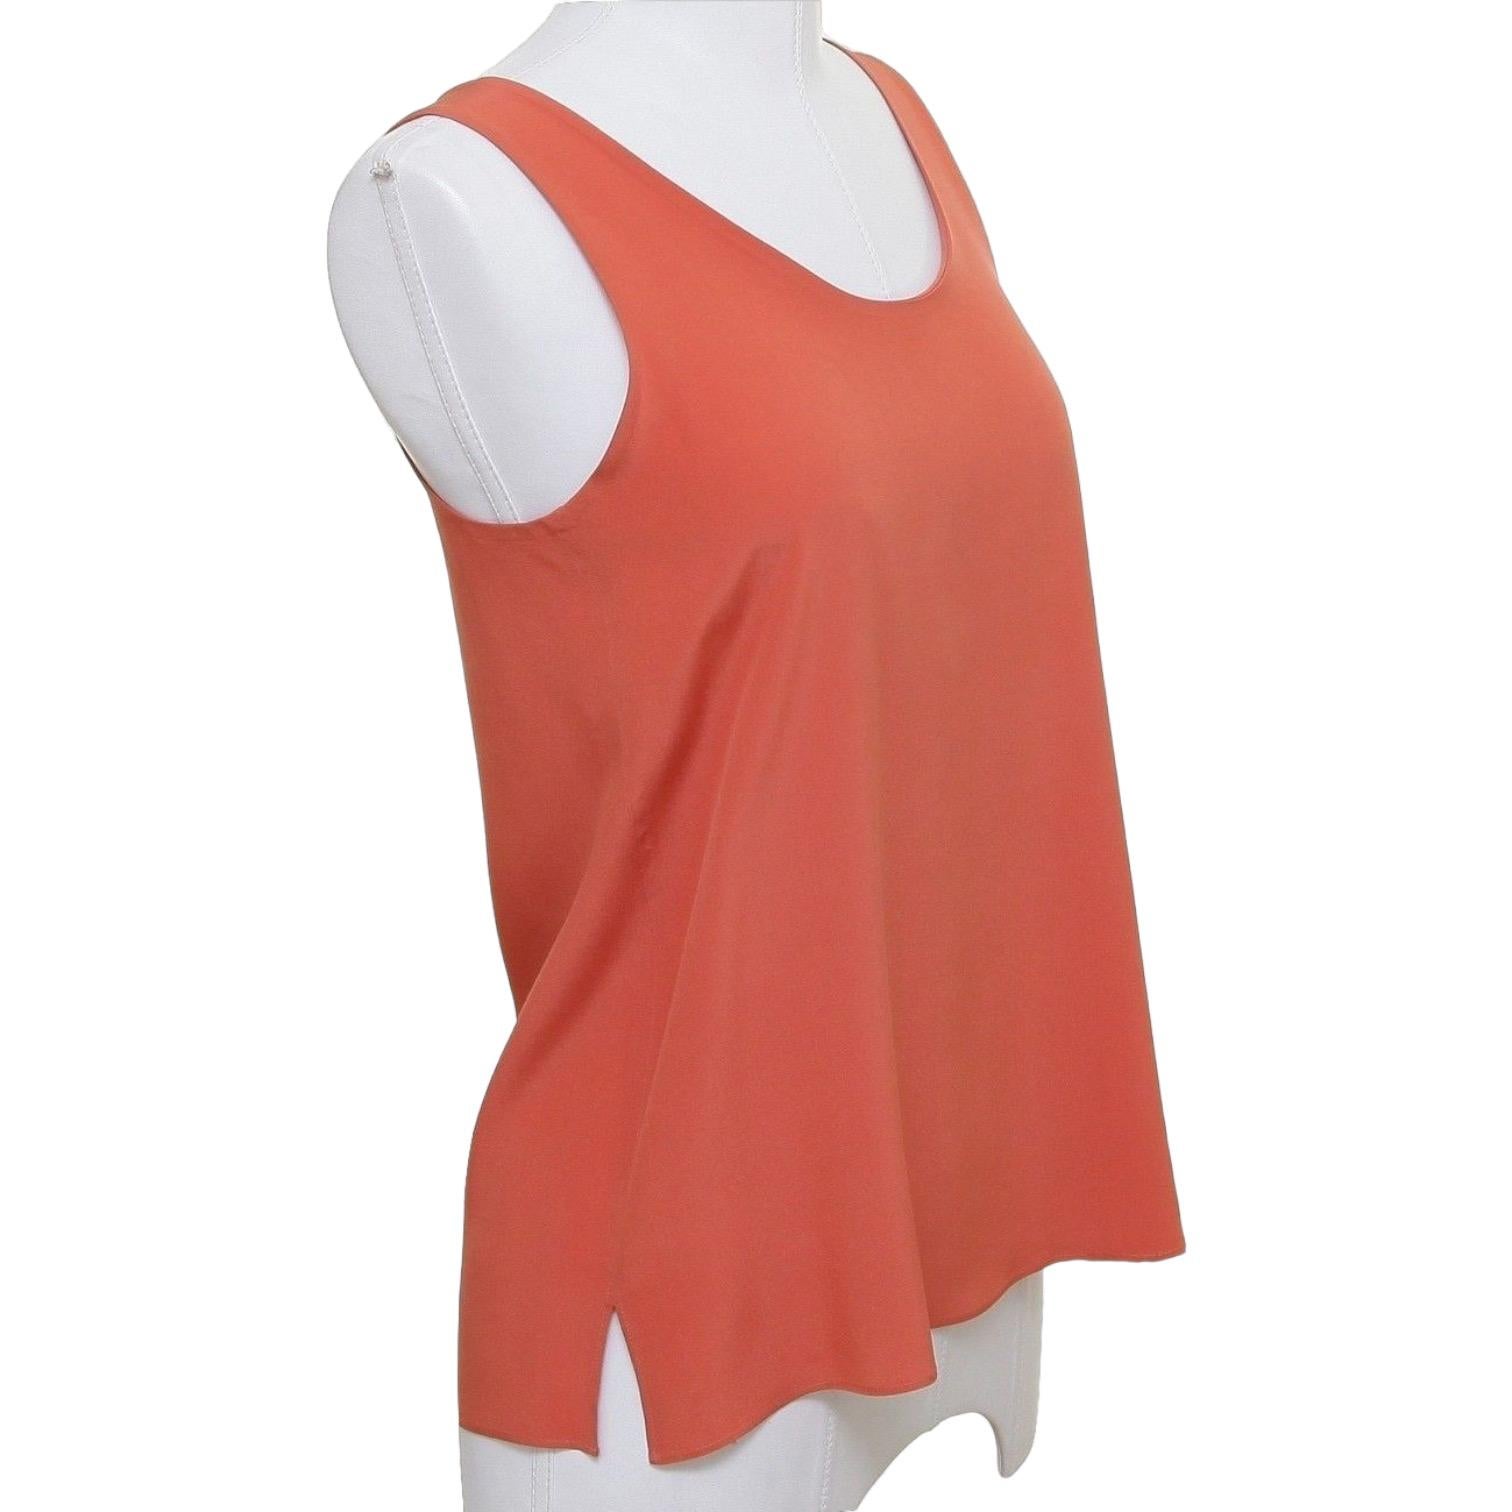 GUARANTEED AUTHENTIC BEAUTIFUL & TIMELESS CHLOE SILK BLOUSE
Looks great with jeans or under a jacket!

• Design:
  - Beautiful orange colored sleeveless blouse.
  - Rounded neckline, slip on.
  - Unlined, very lightweight and elegant.
• Size: 34
•